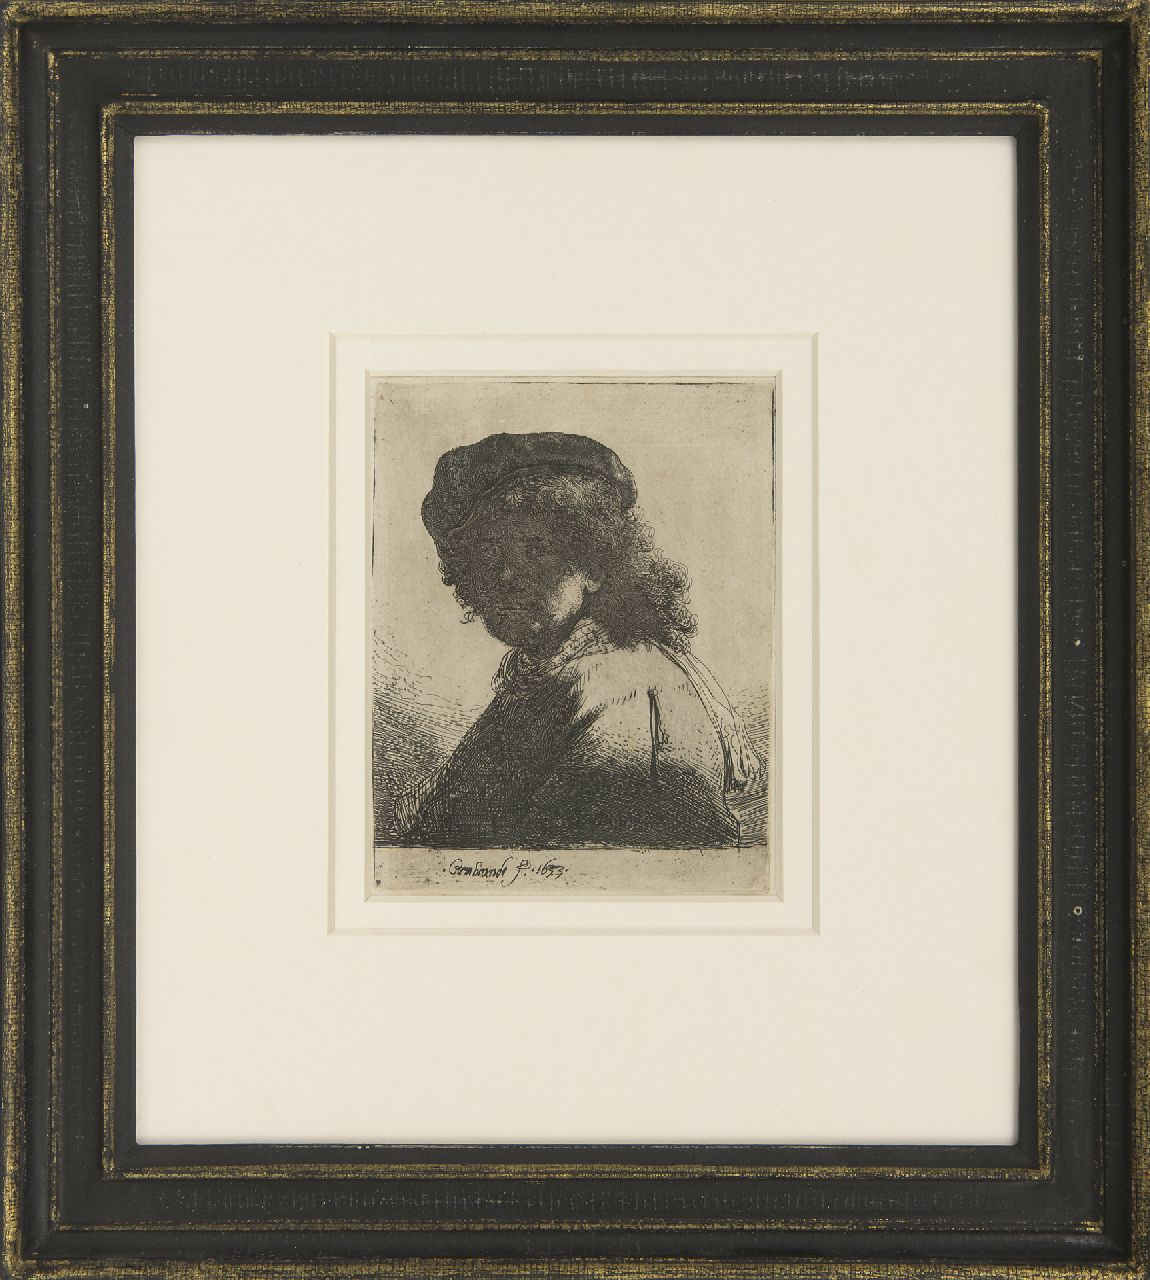 Rembrandt (Rembrandt Harmensz. van Rijn)   | Rembrandt (Rembrandt Harmensz. van Rijn), Self-portrait in a velvet cap and scarf, etching on paper 13.2 x 10.3 cm, signed l.c. in the plate and dated 1633 in the plate